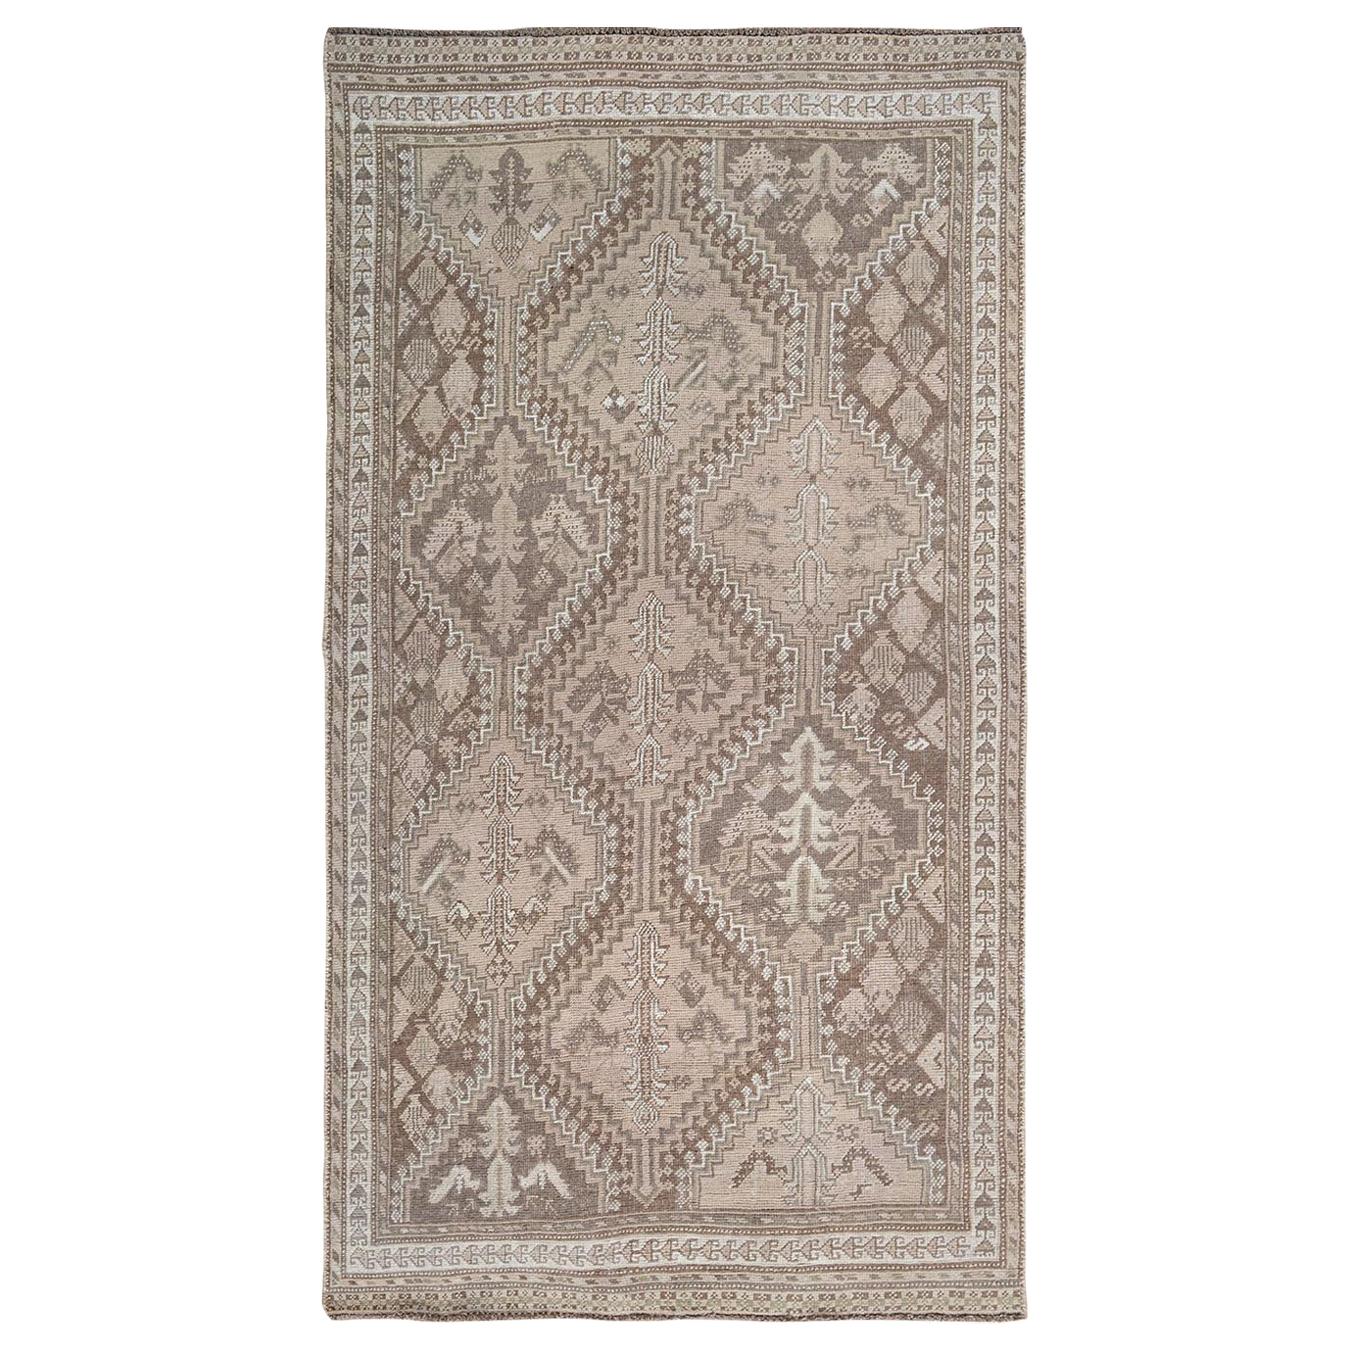 Earth Tone Colors Vintage and Worn Down Persian Qashqai Pure Wool Rug